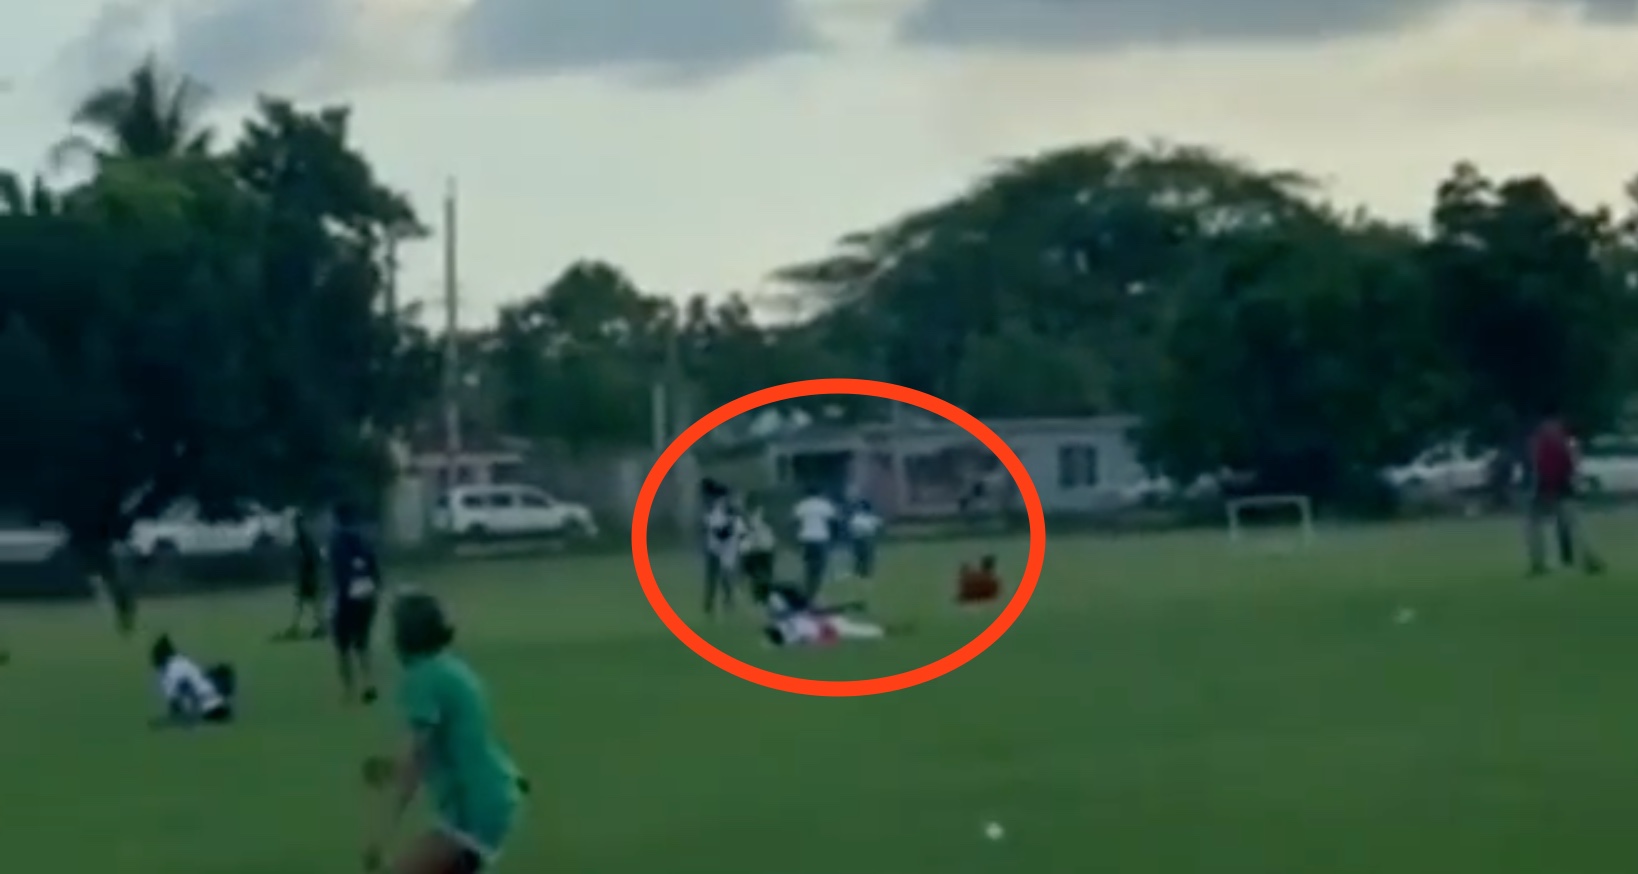 Triple Murder Shooting At Football Match In Old Harbour Caught On Camera – Watch Video – YARDHYPE